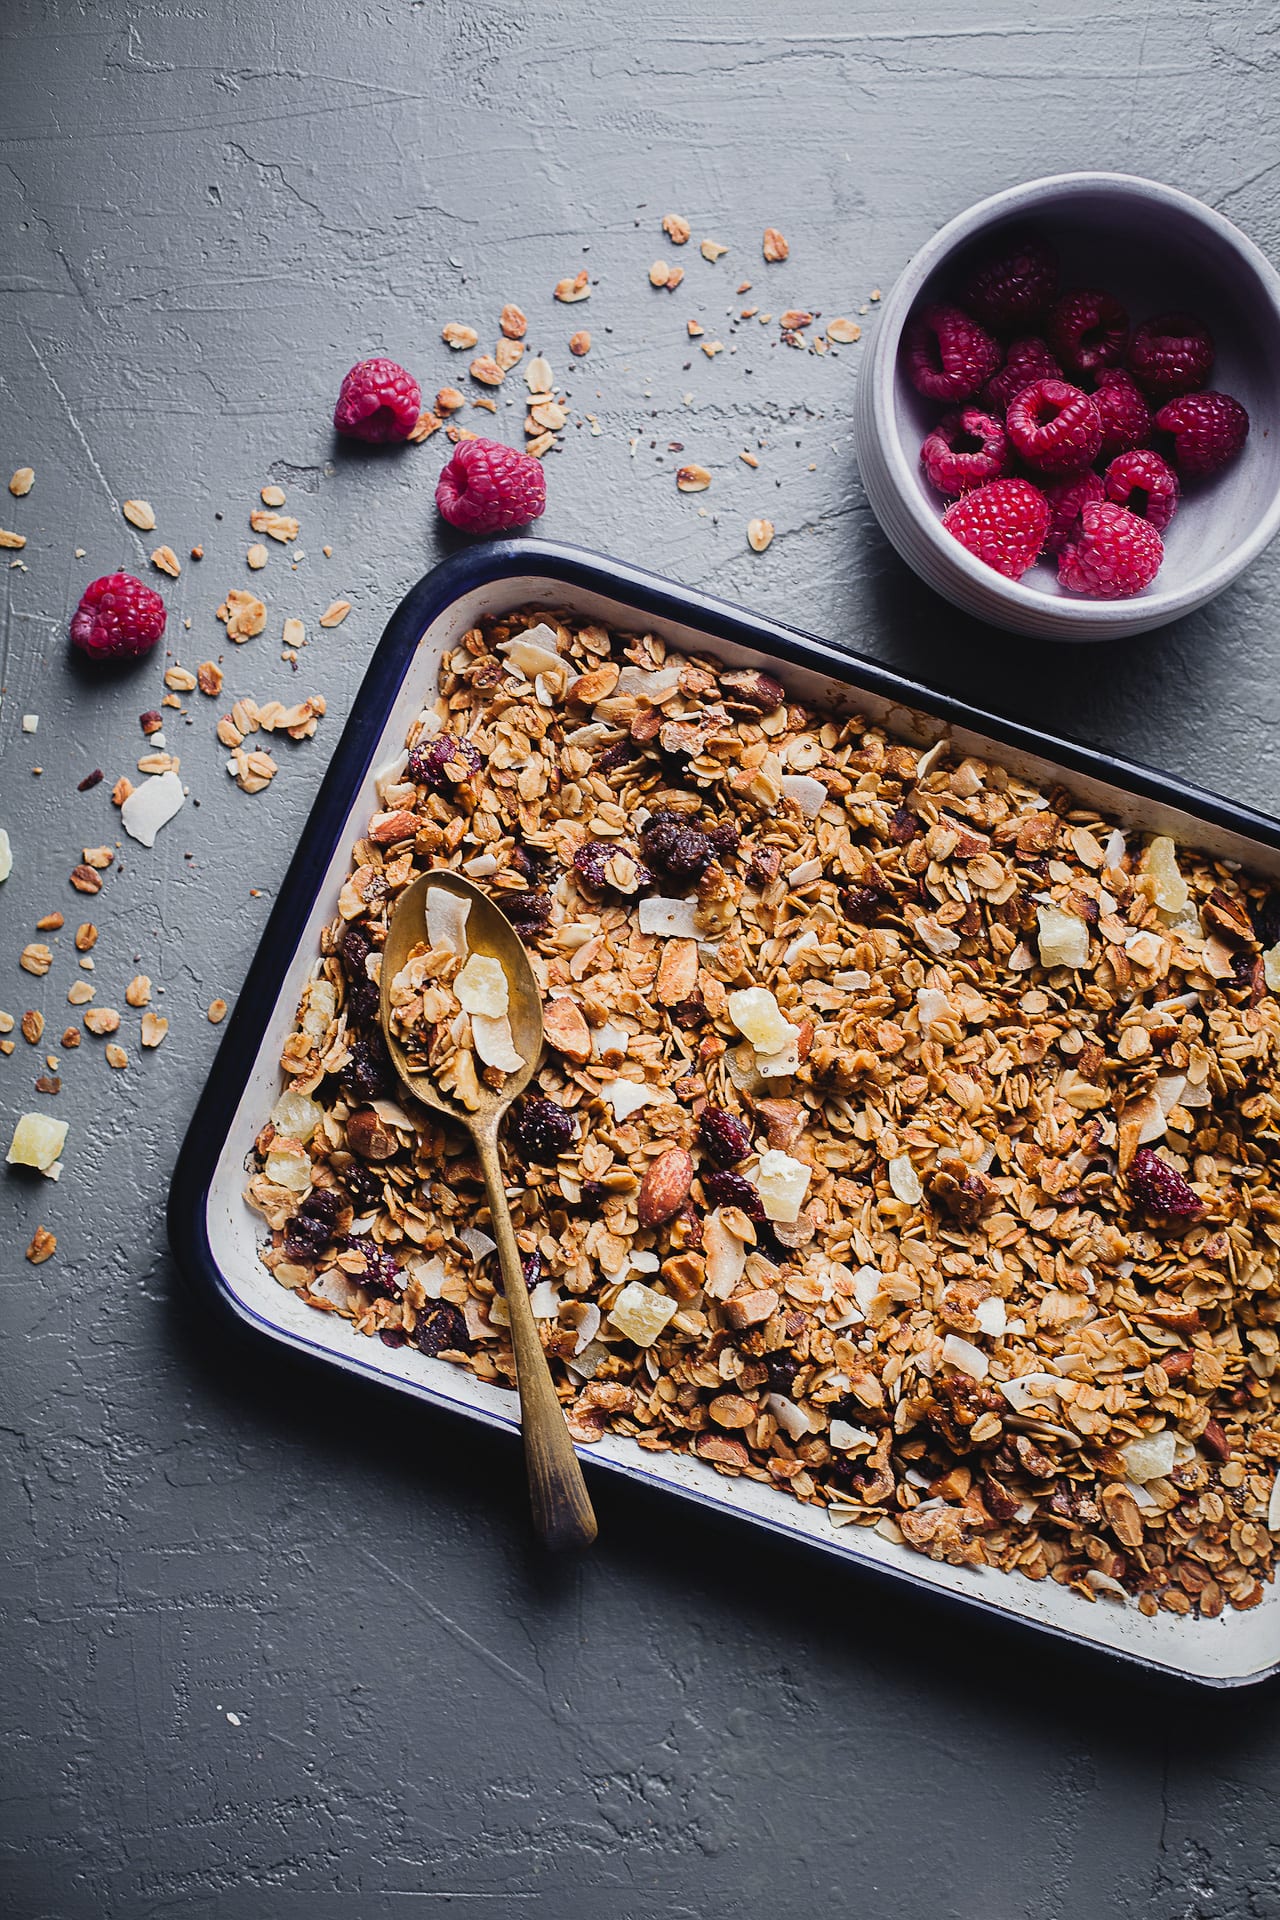 Super Simple Fruits and Nuts Granola | Playful Cooking #granola #simple #breakfast #foodphotography